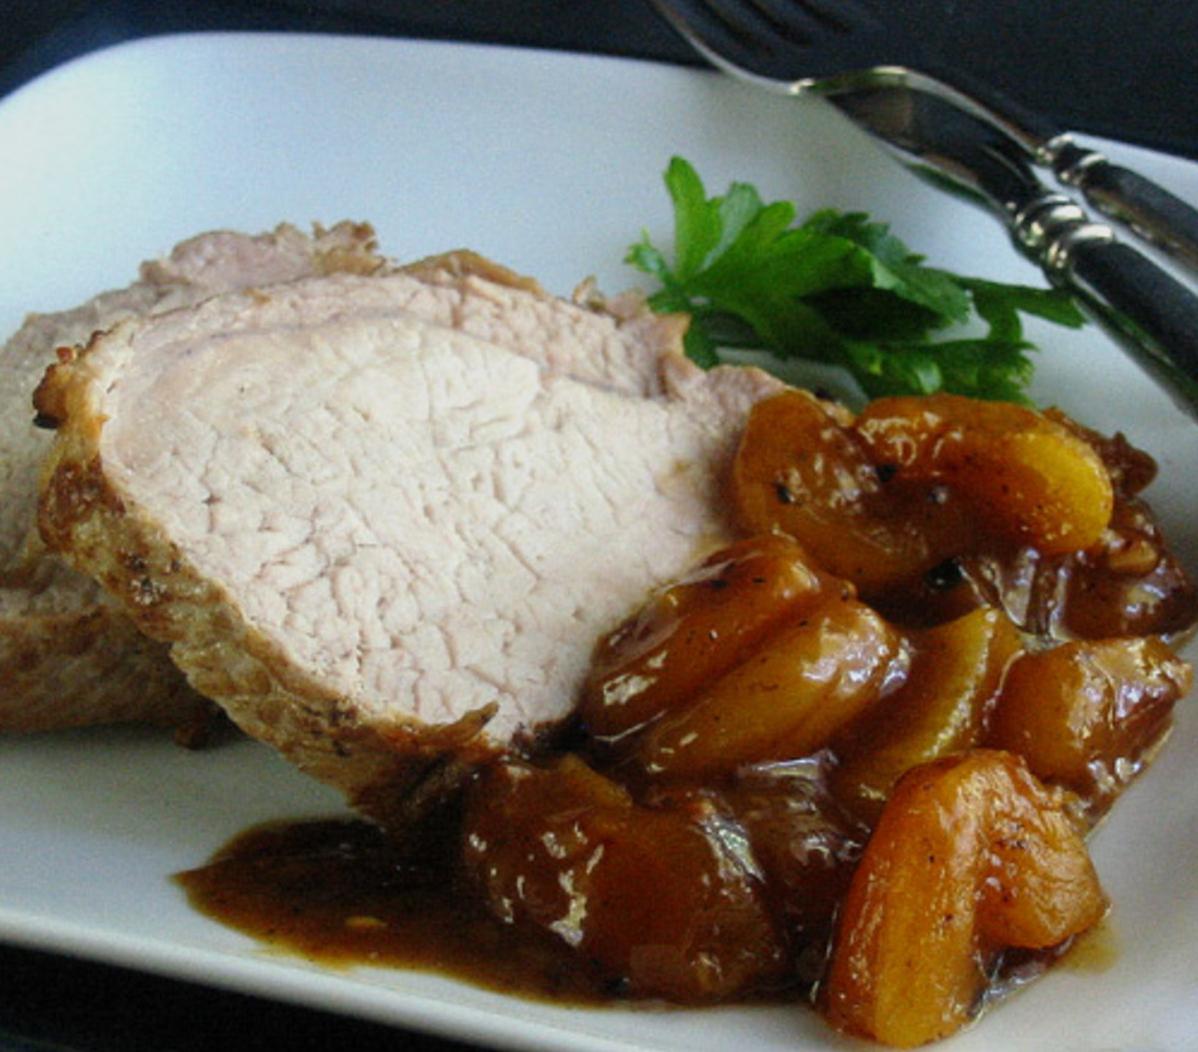  Enjoy a succulent and juicy pork tenderloin in a sweet and savory sauce complemented by apricots.